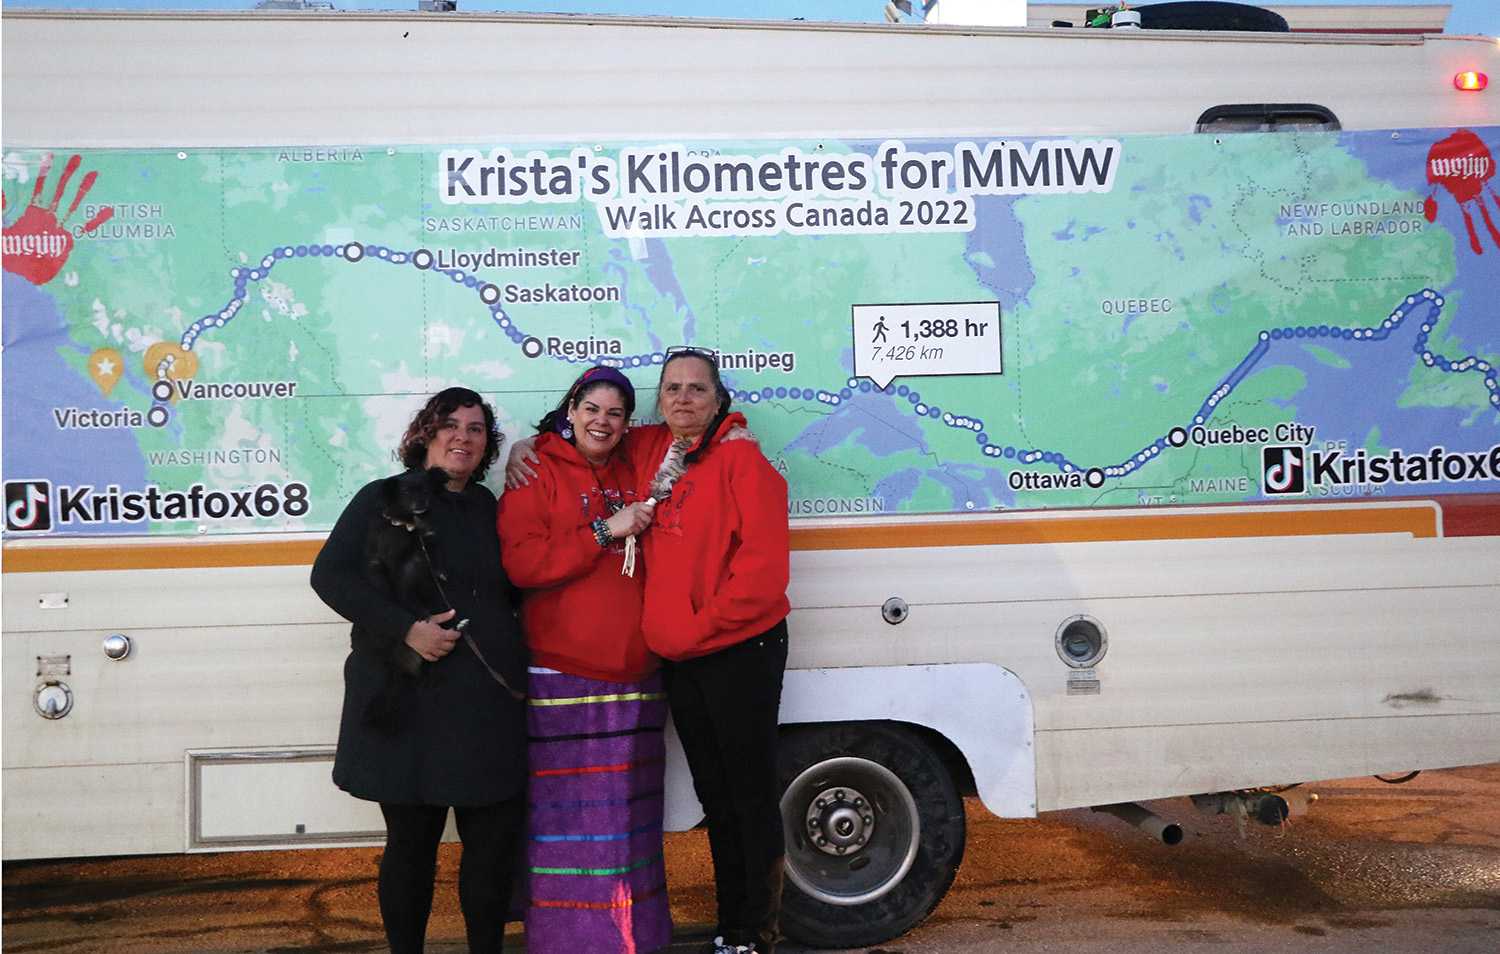 On April 28, (right) Krista Fox passed through Moosomin, Saskatchewan while on her journey of walking across Canada. Her walk is for raising awareness for Murdered and Missing Indigenous Women (MMIW). Left: Lindsey Bishop and Krista were welcomed in town by (middle) Joy Hamilton-Flaman of Moosomin.